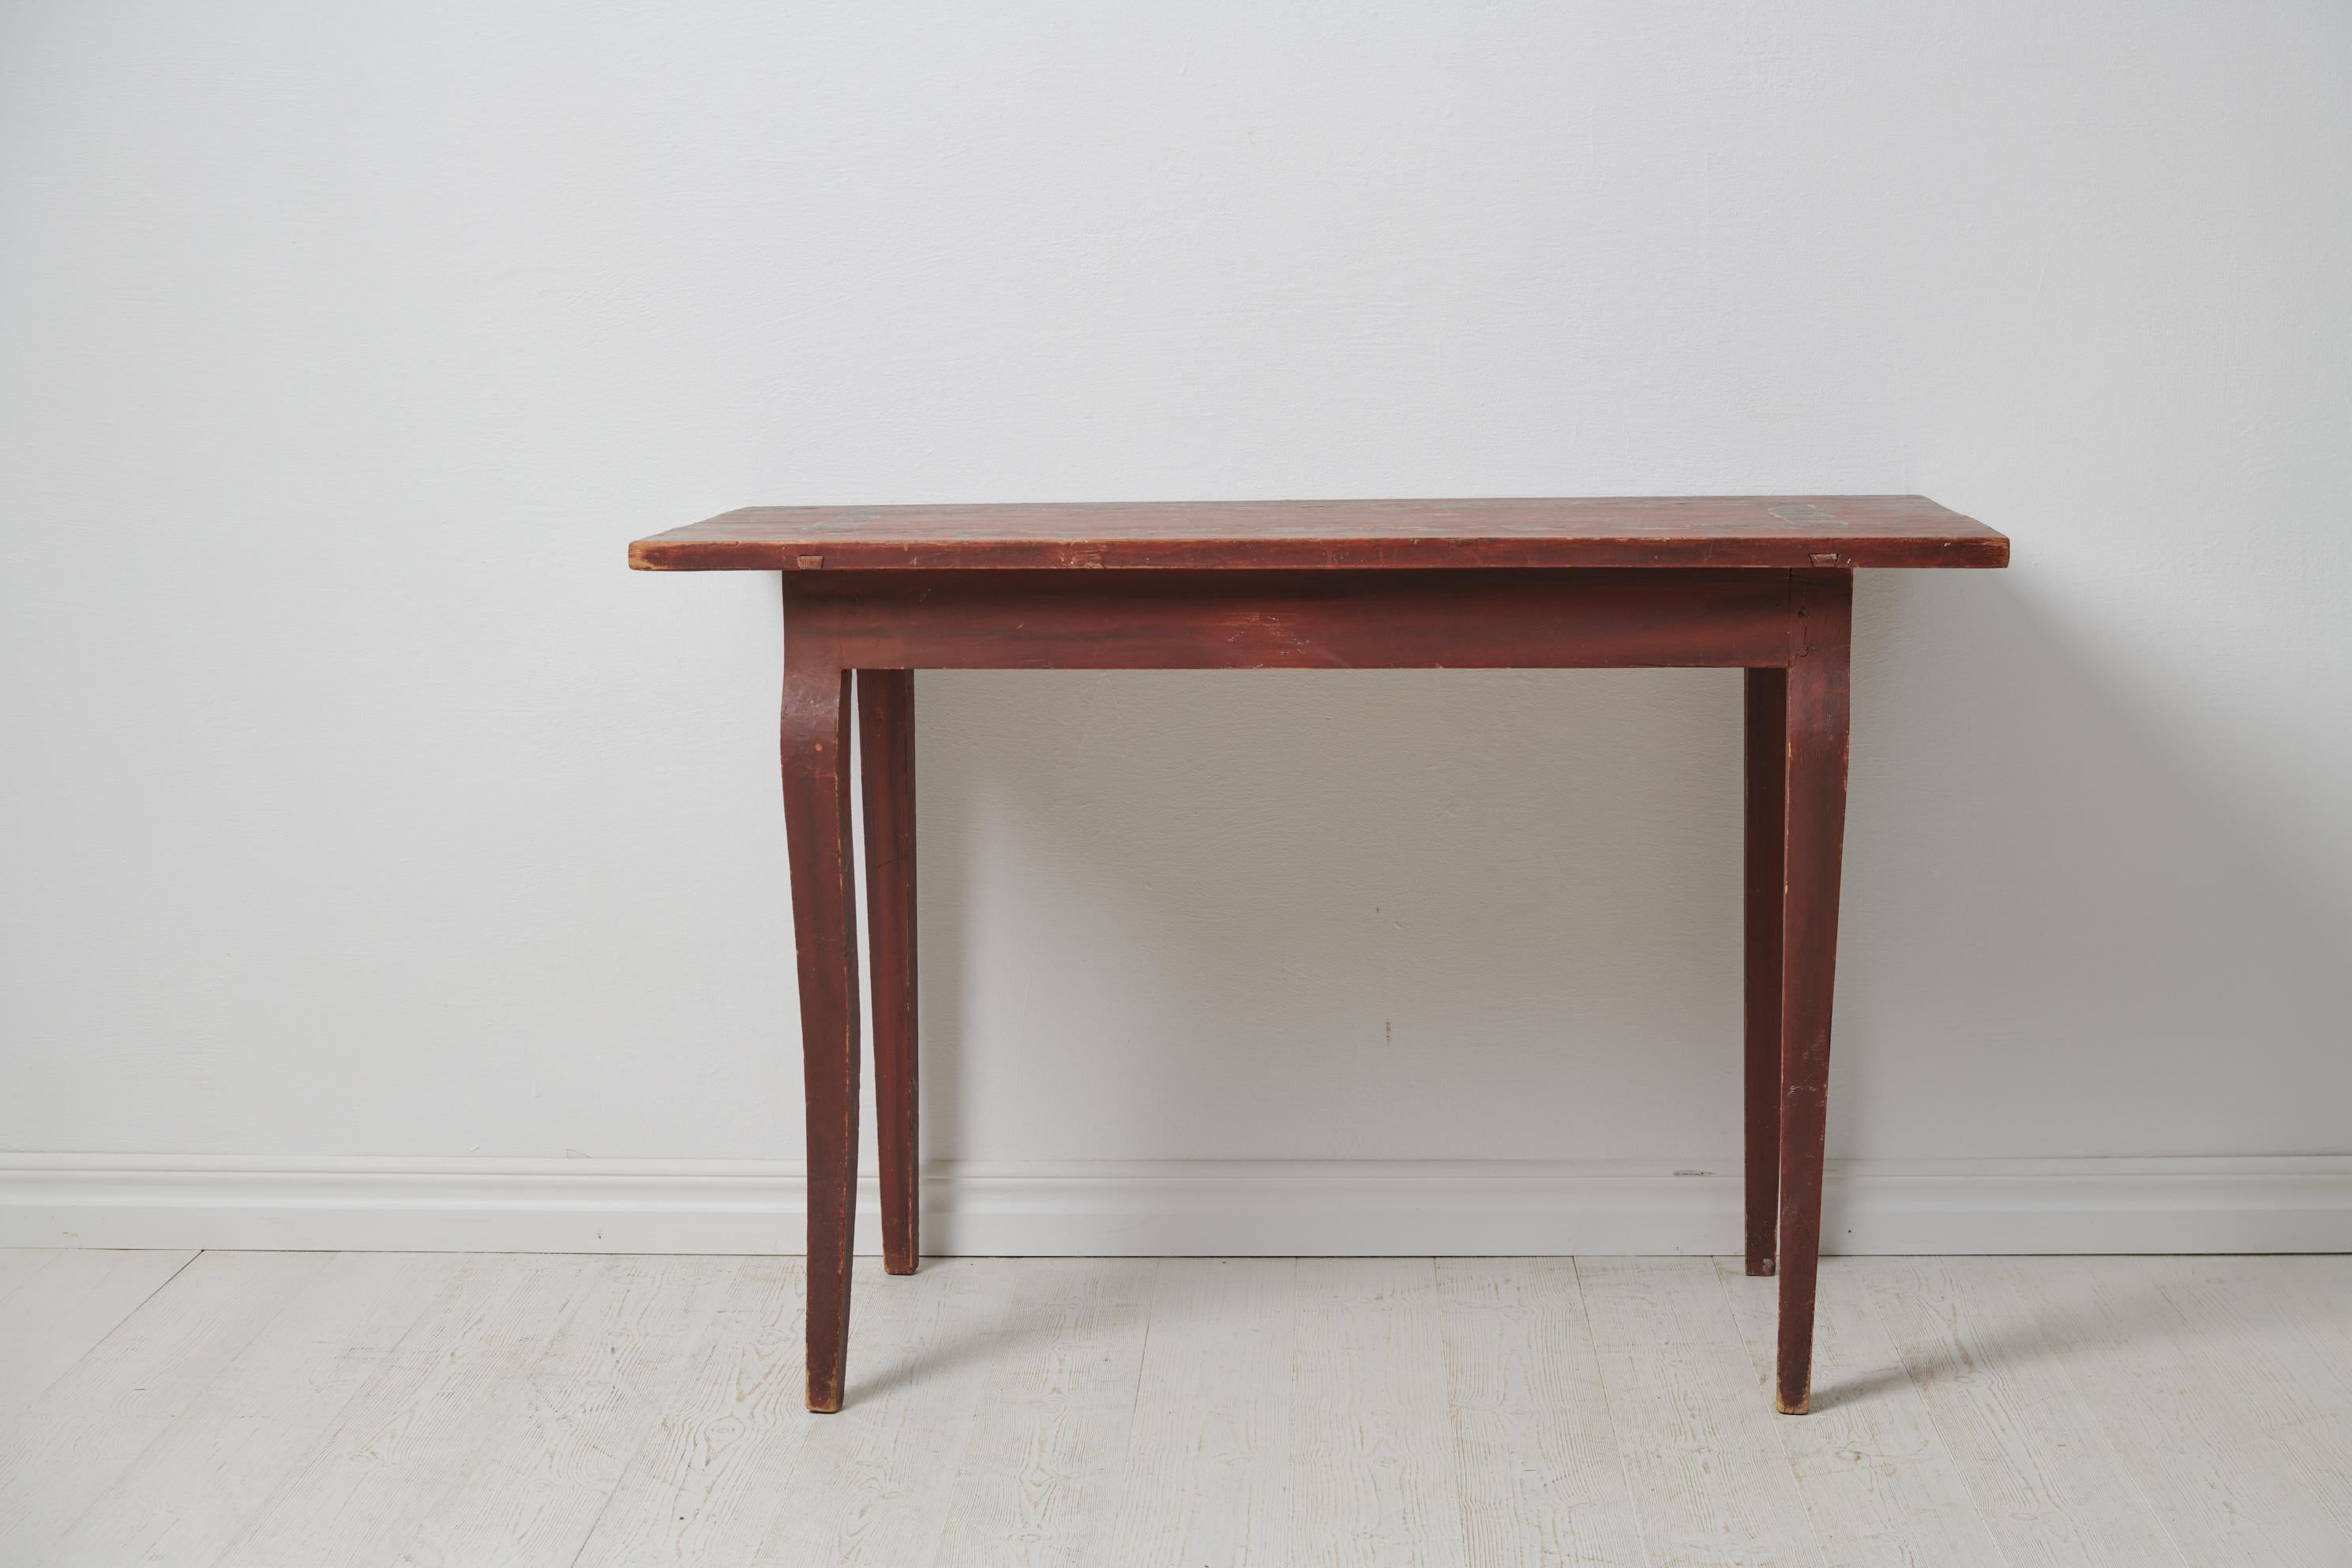 Antique Swedish Genuine Country Console Table or Desk In Good Condition For Sale In Kramfors, SE